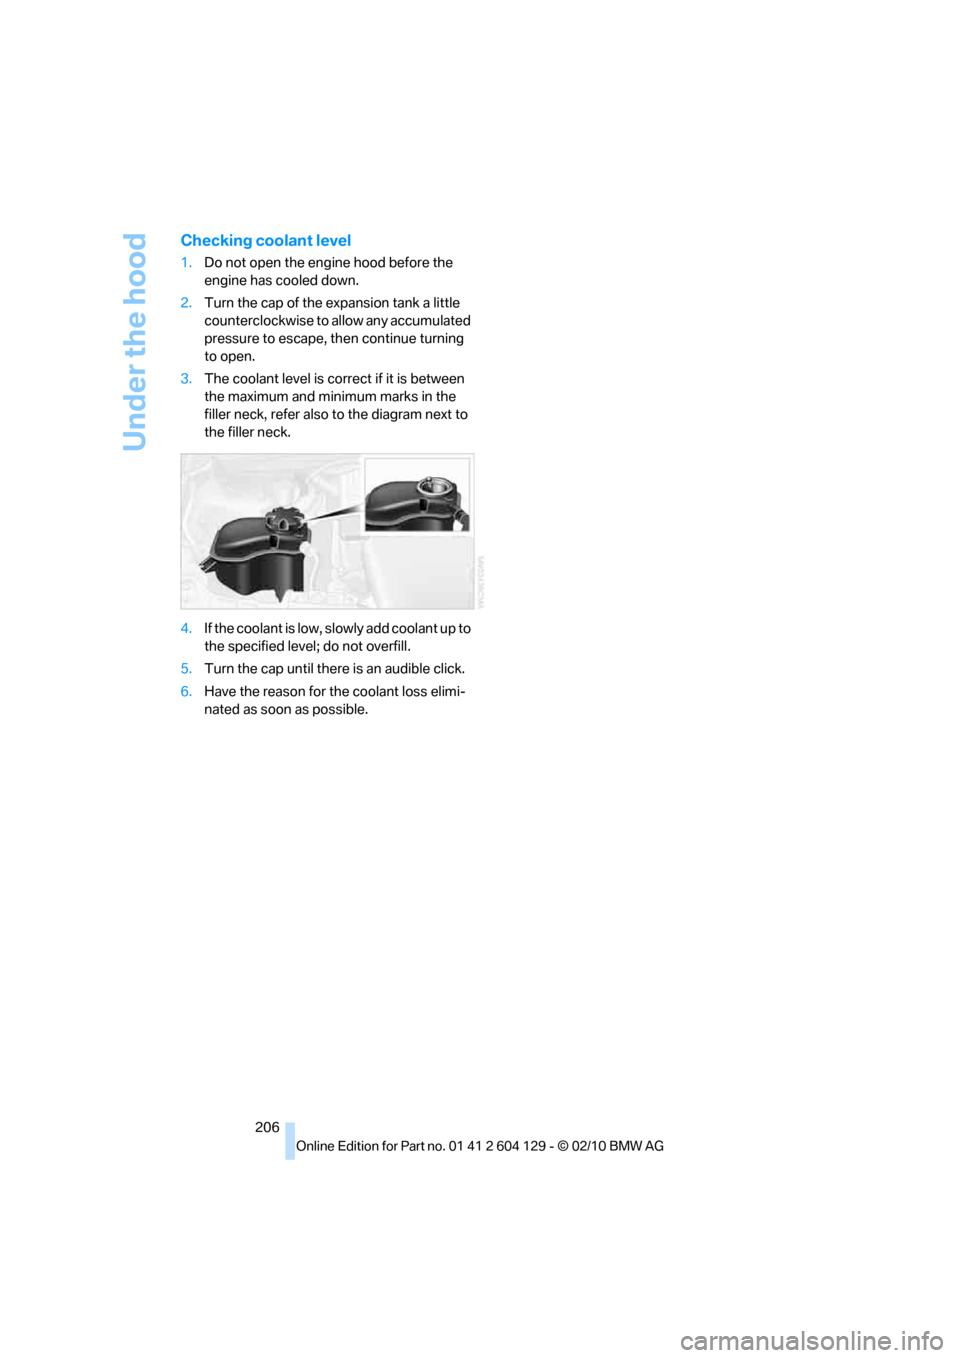 BMW 135I CONVERTIBLE 2011 E88 User Guide Under the hood
206
Checking coolant level
1.Do not open the engine hood before the 
engine has cooled down.
2.Turn the cap of the expansion tank a little 
counterclockwise to allow any accumulated 
pr